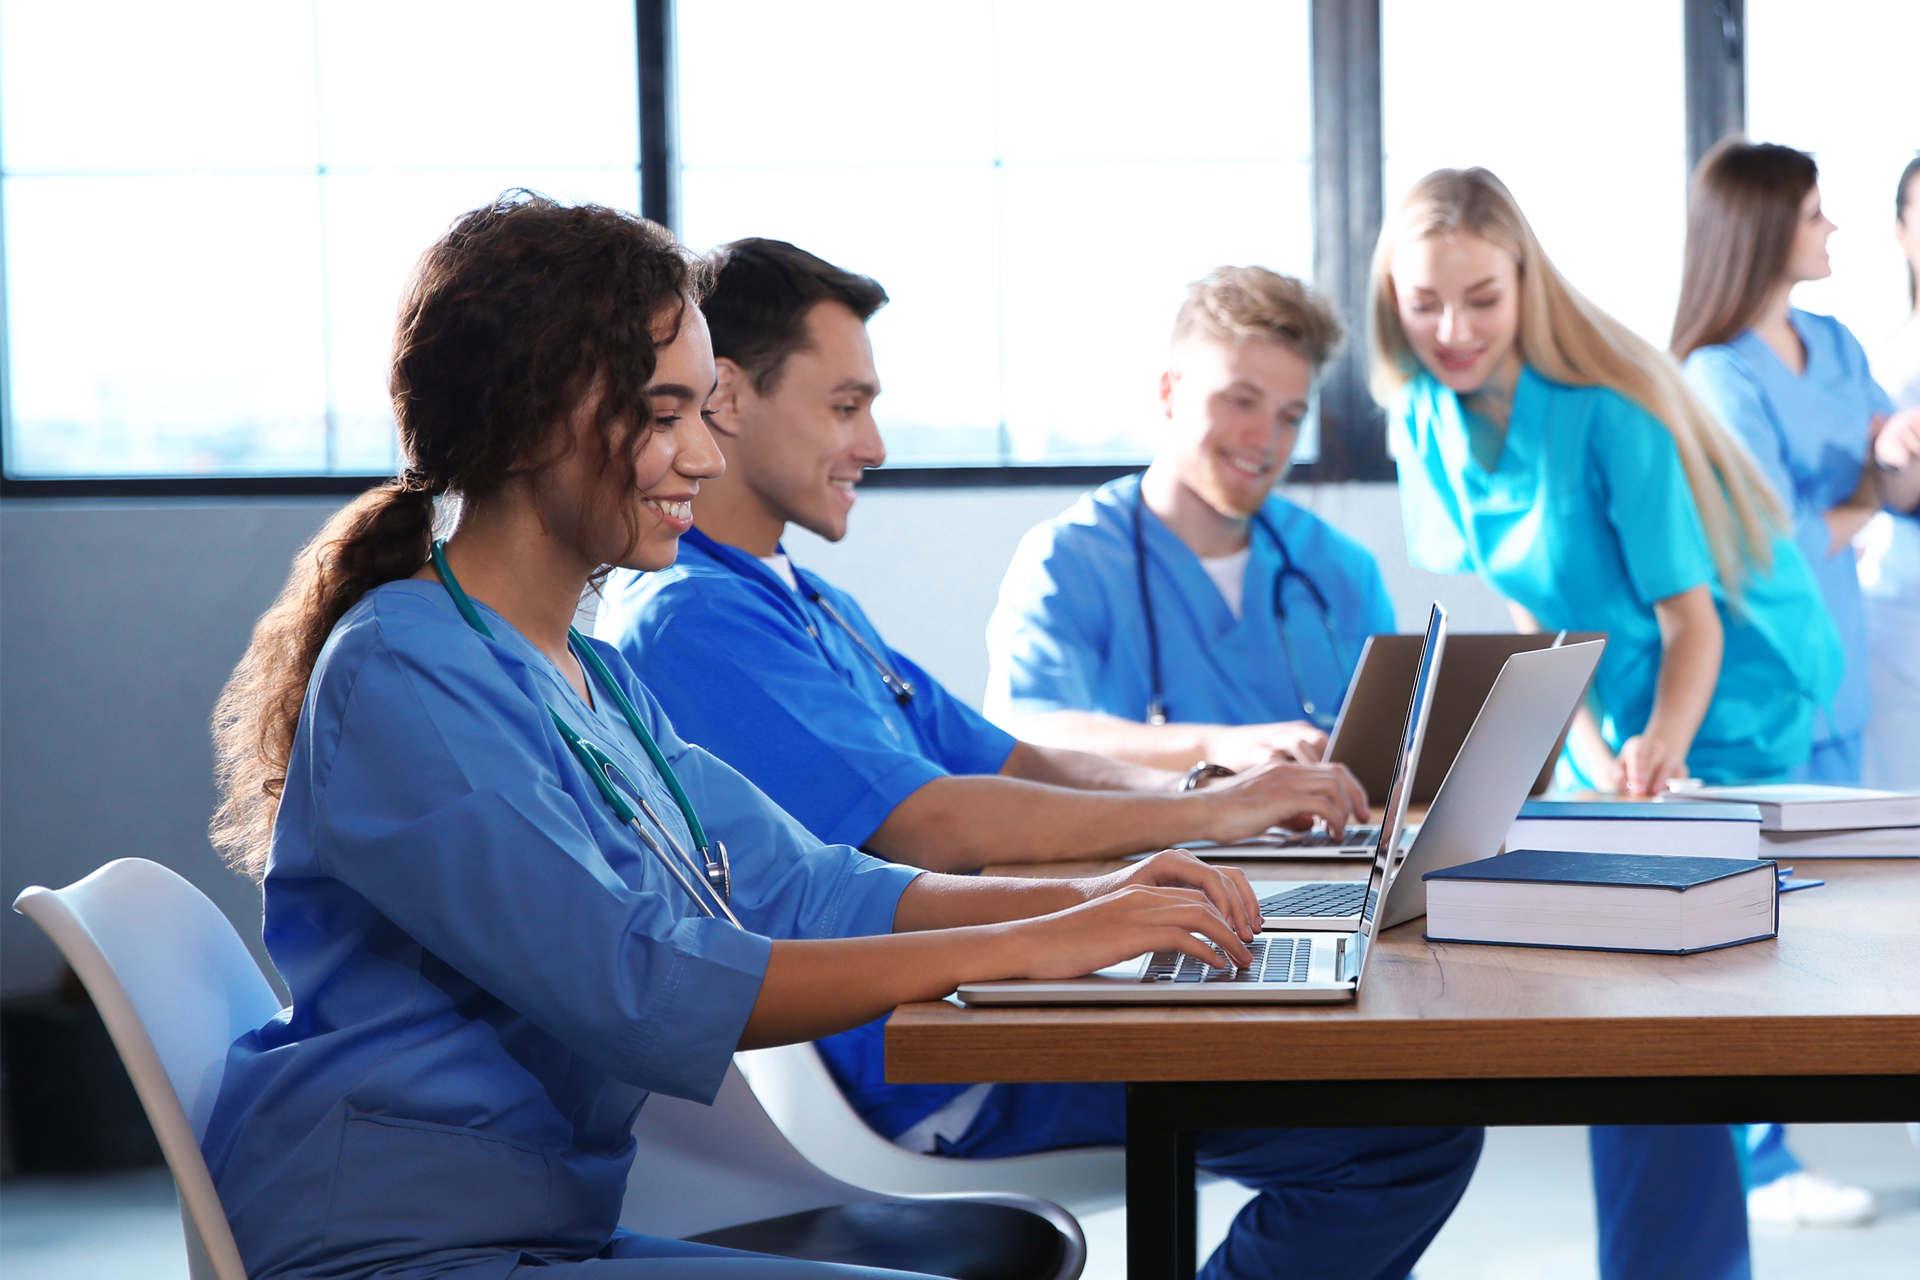 Group of nurses working at laptops in conference room